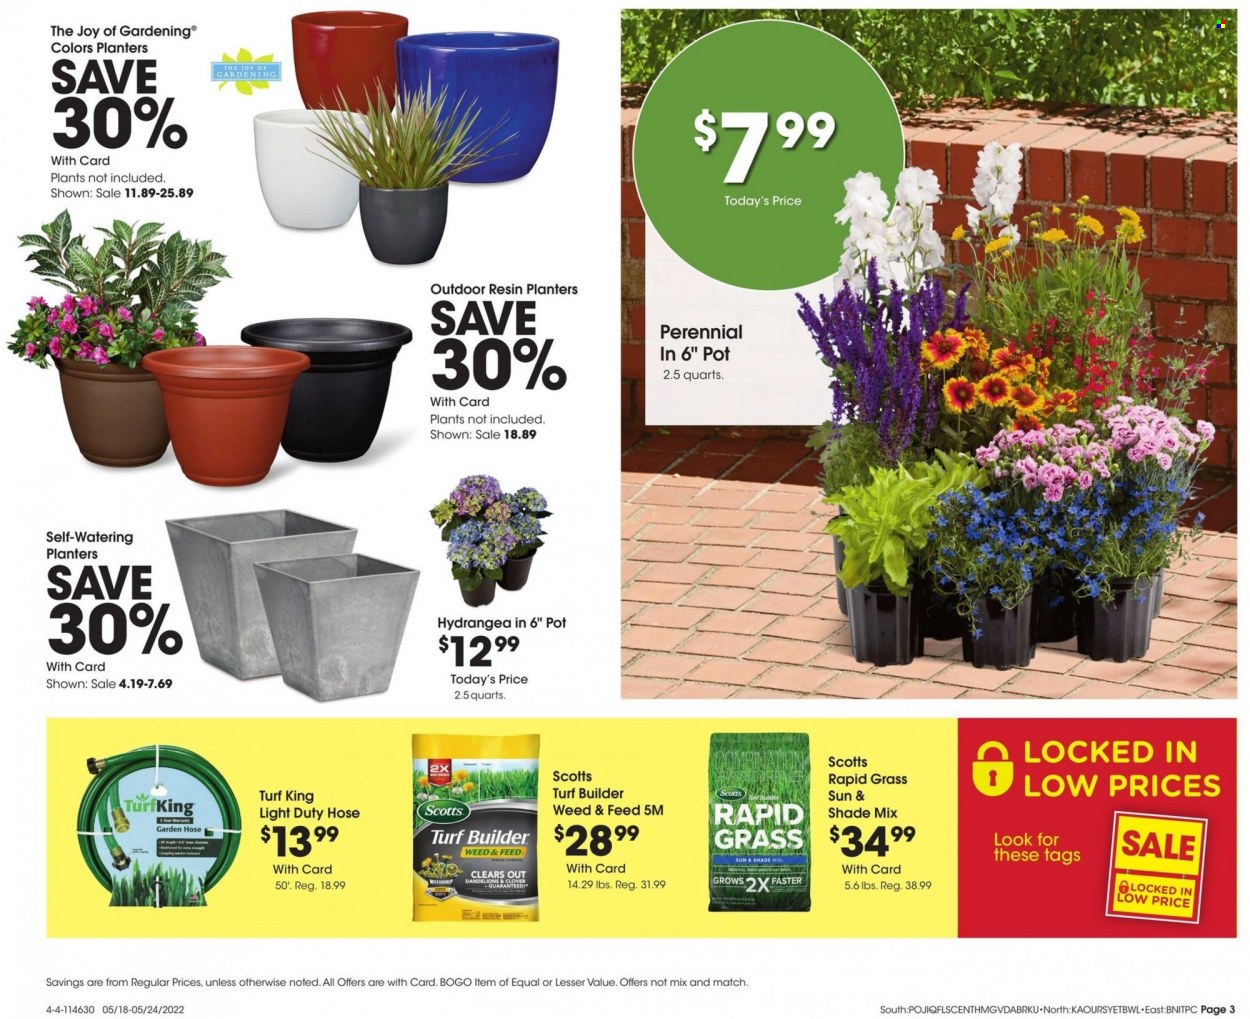 Fred Meyer ad  - 05.18.2022 - 05.24.2022.